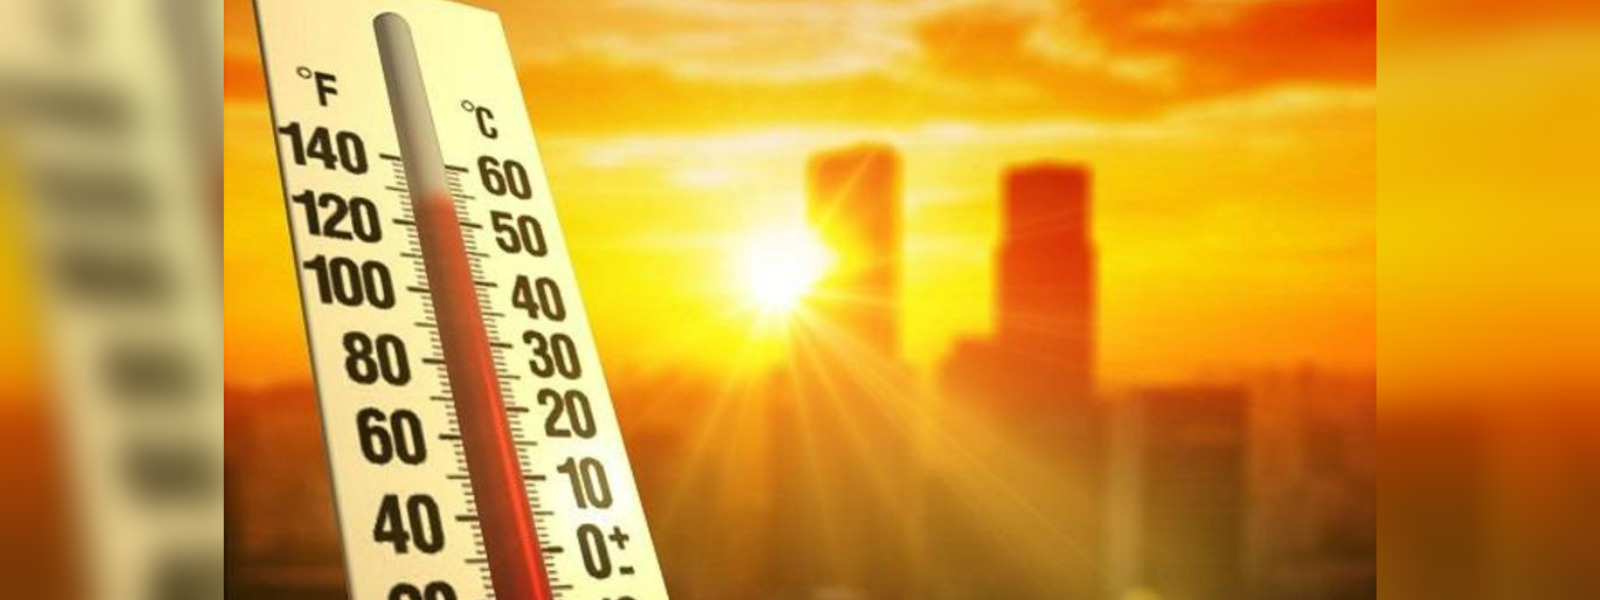 Heat warnings for two provinces, five districts